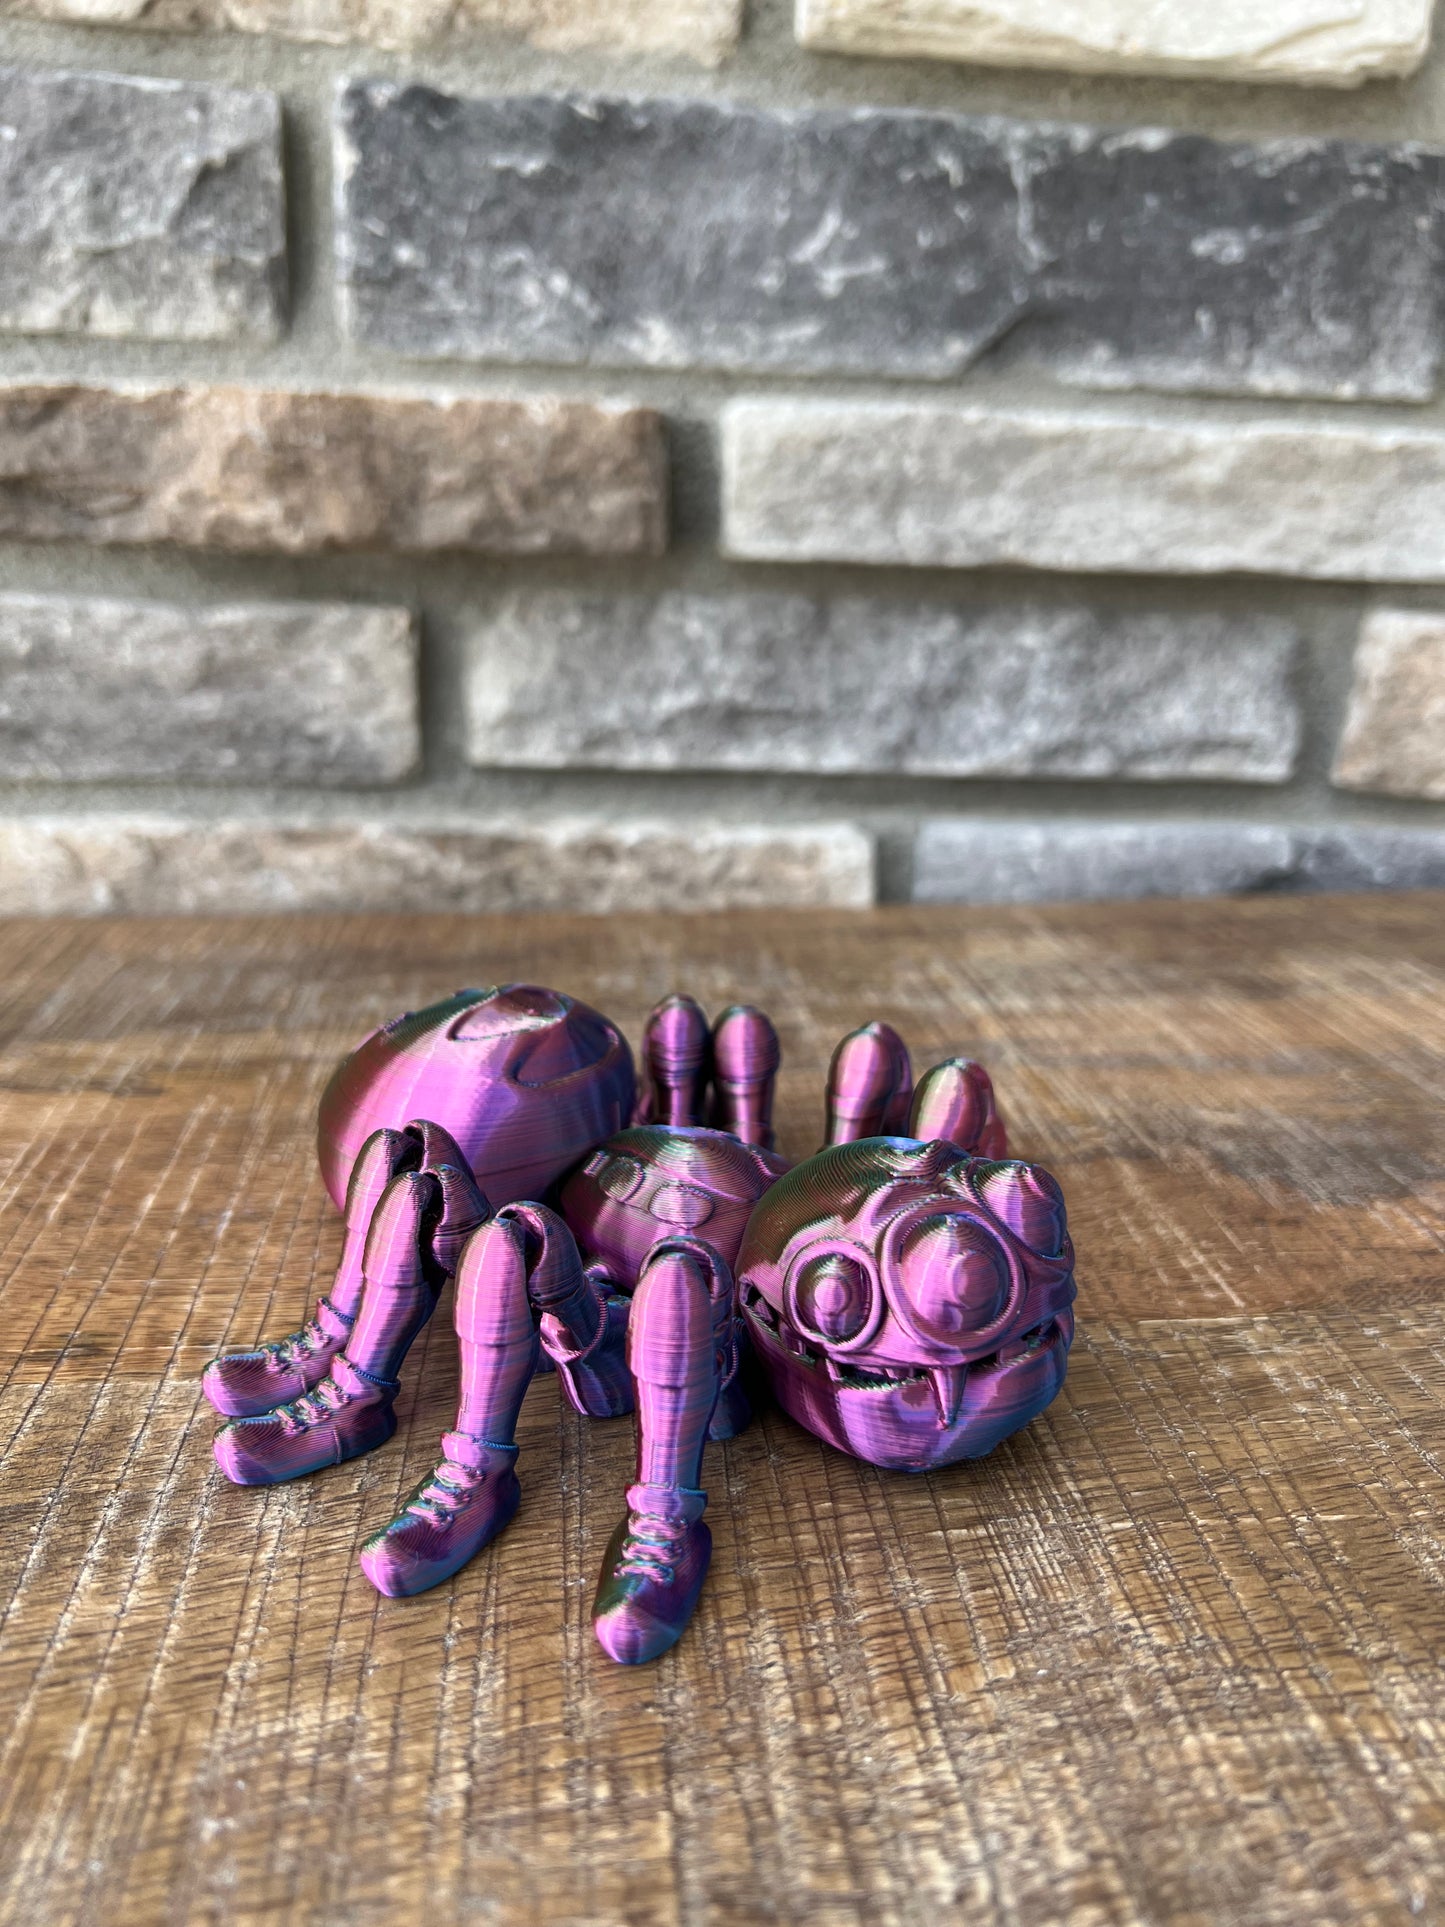 Spider | 3d Printed | Articulated Flexible | Custom Fidget Toy